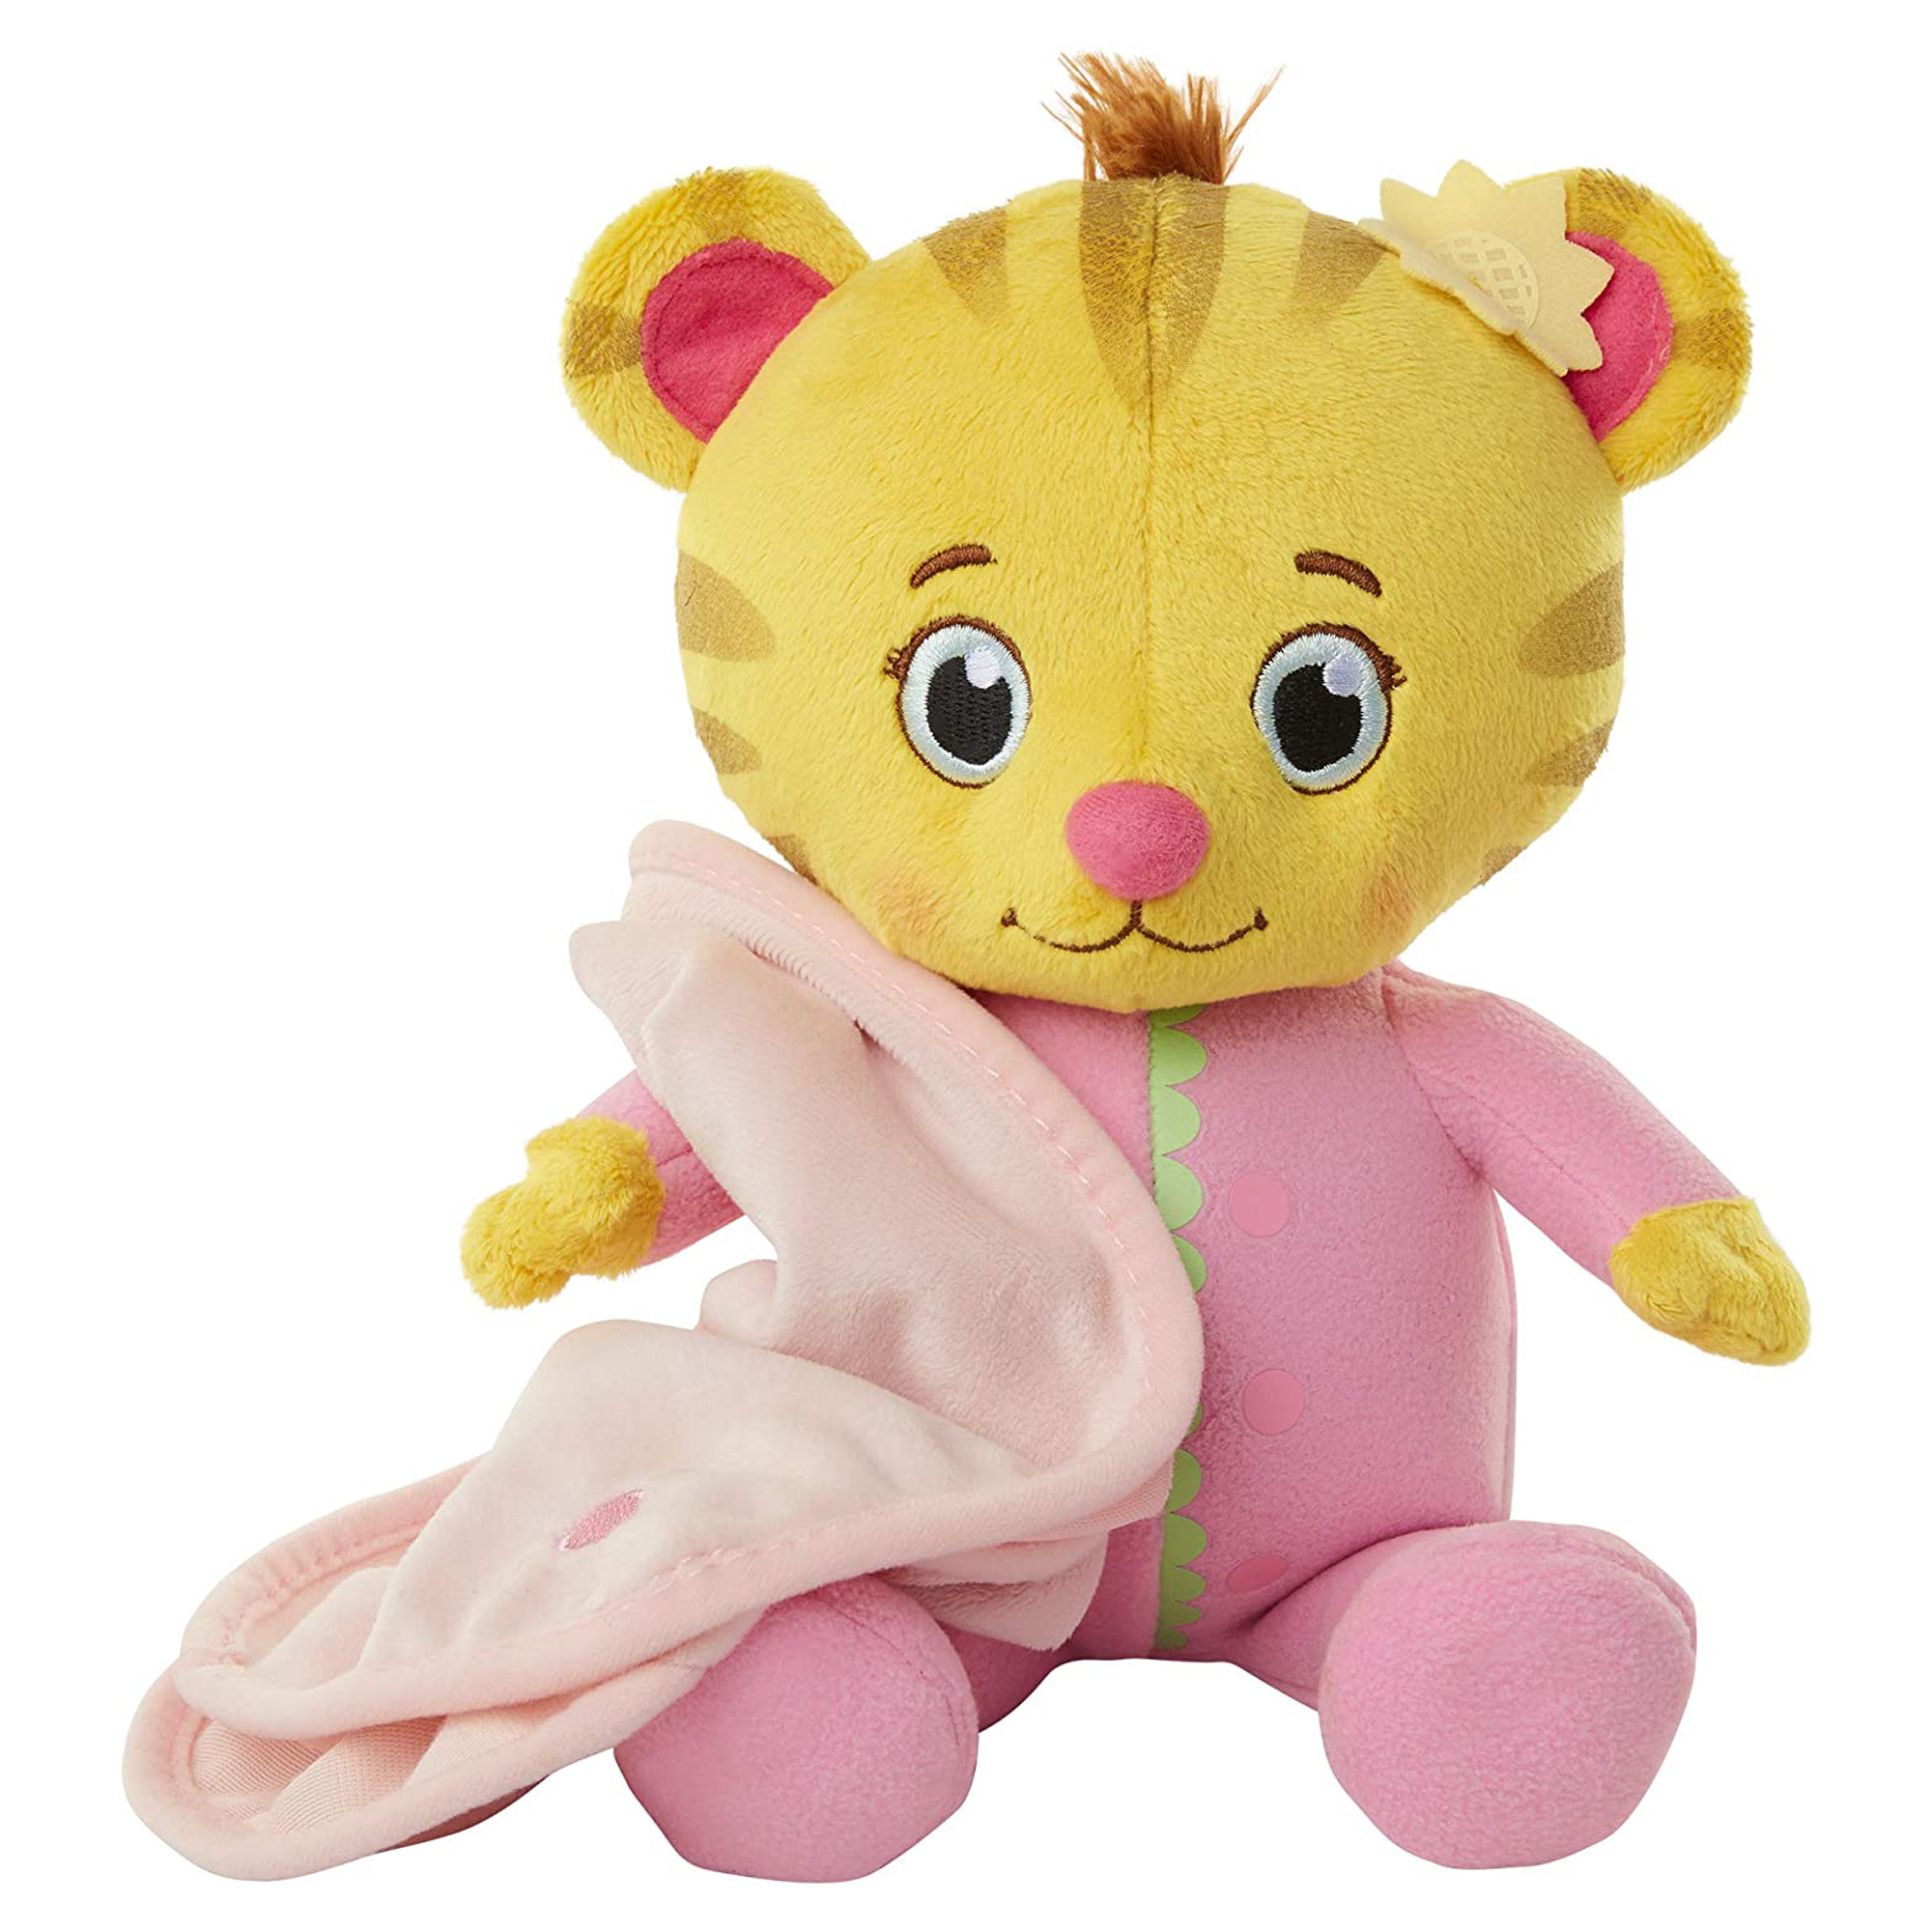 Cute and Cuddly Baby Margaret Plush